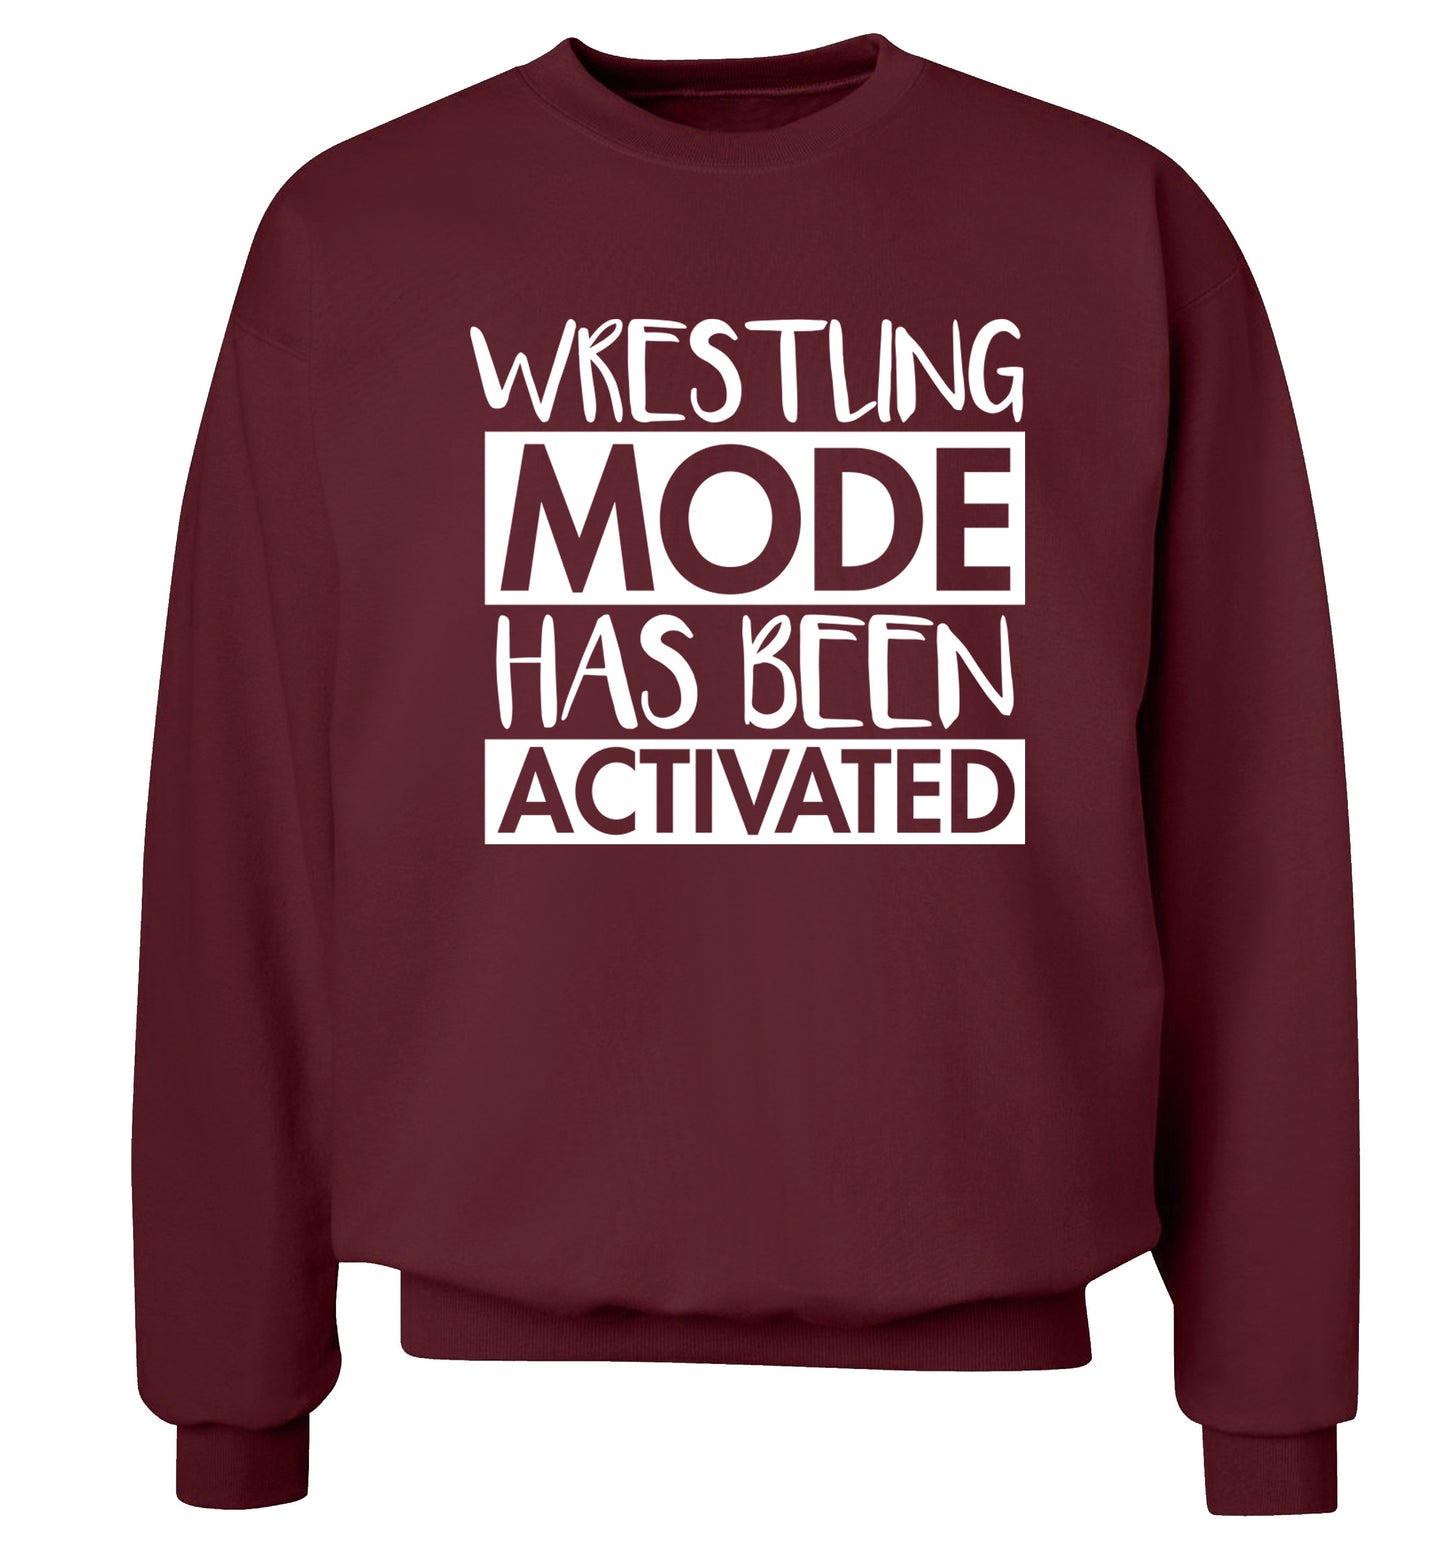 Wresting mode activated Adult's unisex maroon Sweater 2XL